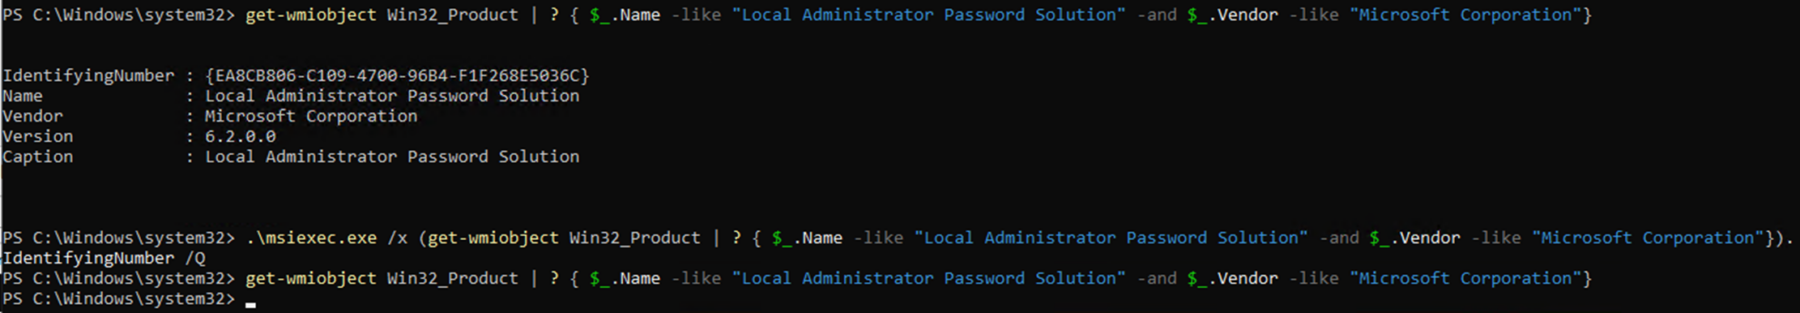 Screenshot PowerShell: .\msiexec.exe /x (get-wmiobject Win32_Product | ? { $_.Name -like "Local Administrator Password Solution" -and $_.Vendor -like "Microsoft Corporation"}).IdentifyingNumber /Q